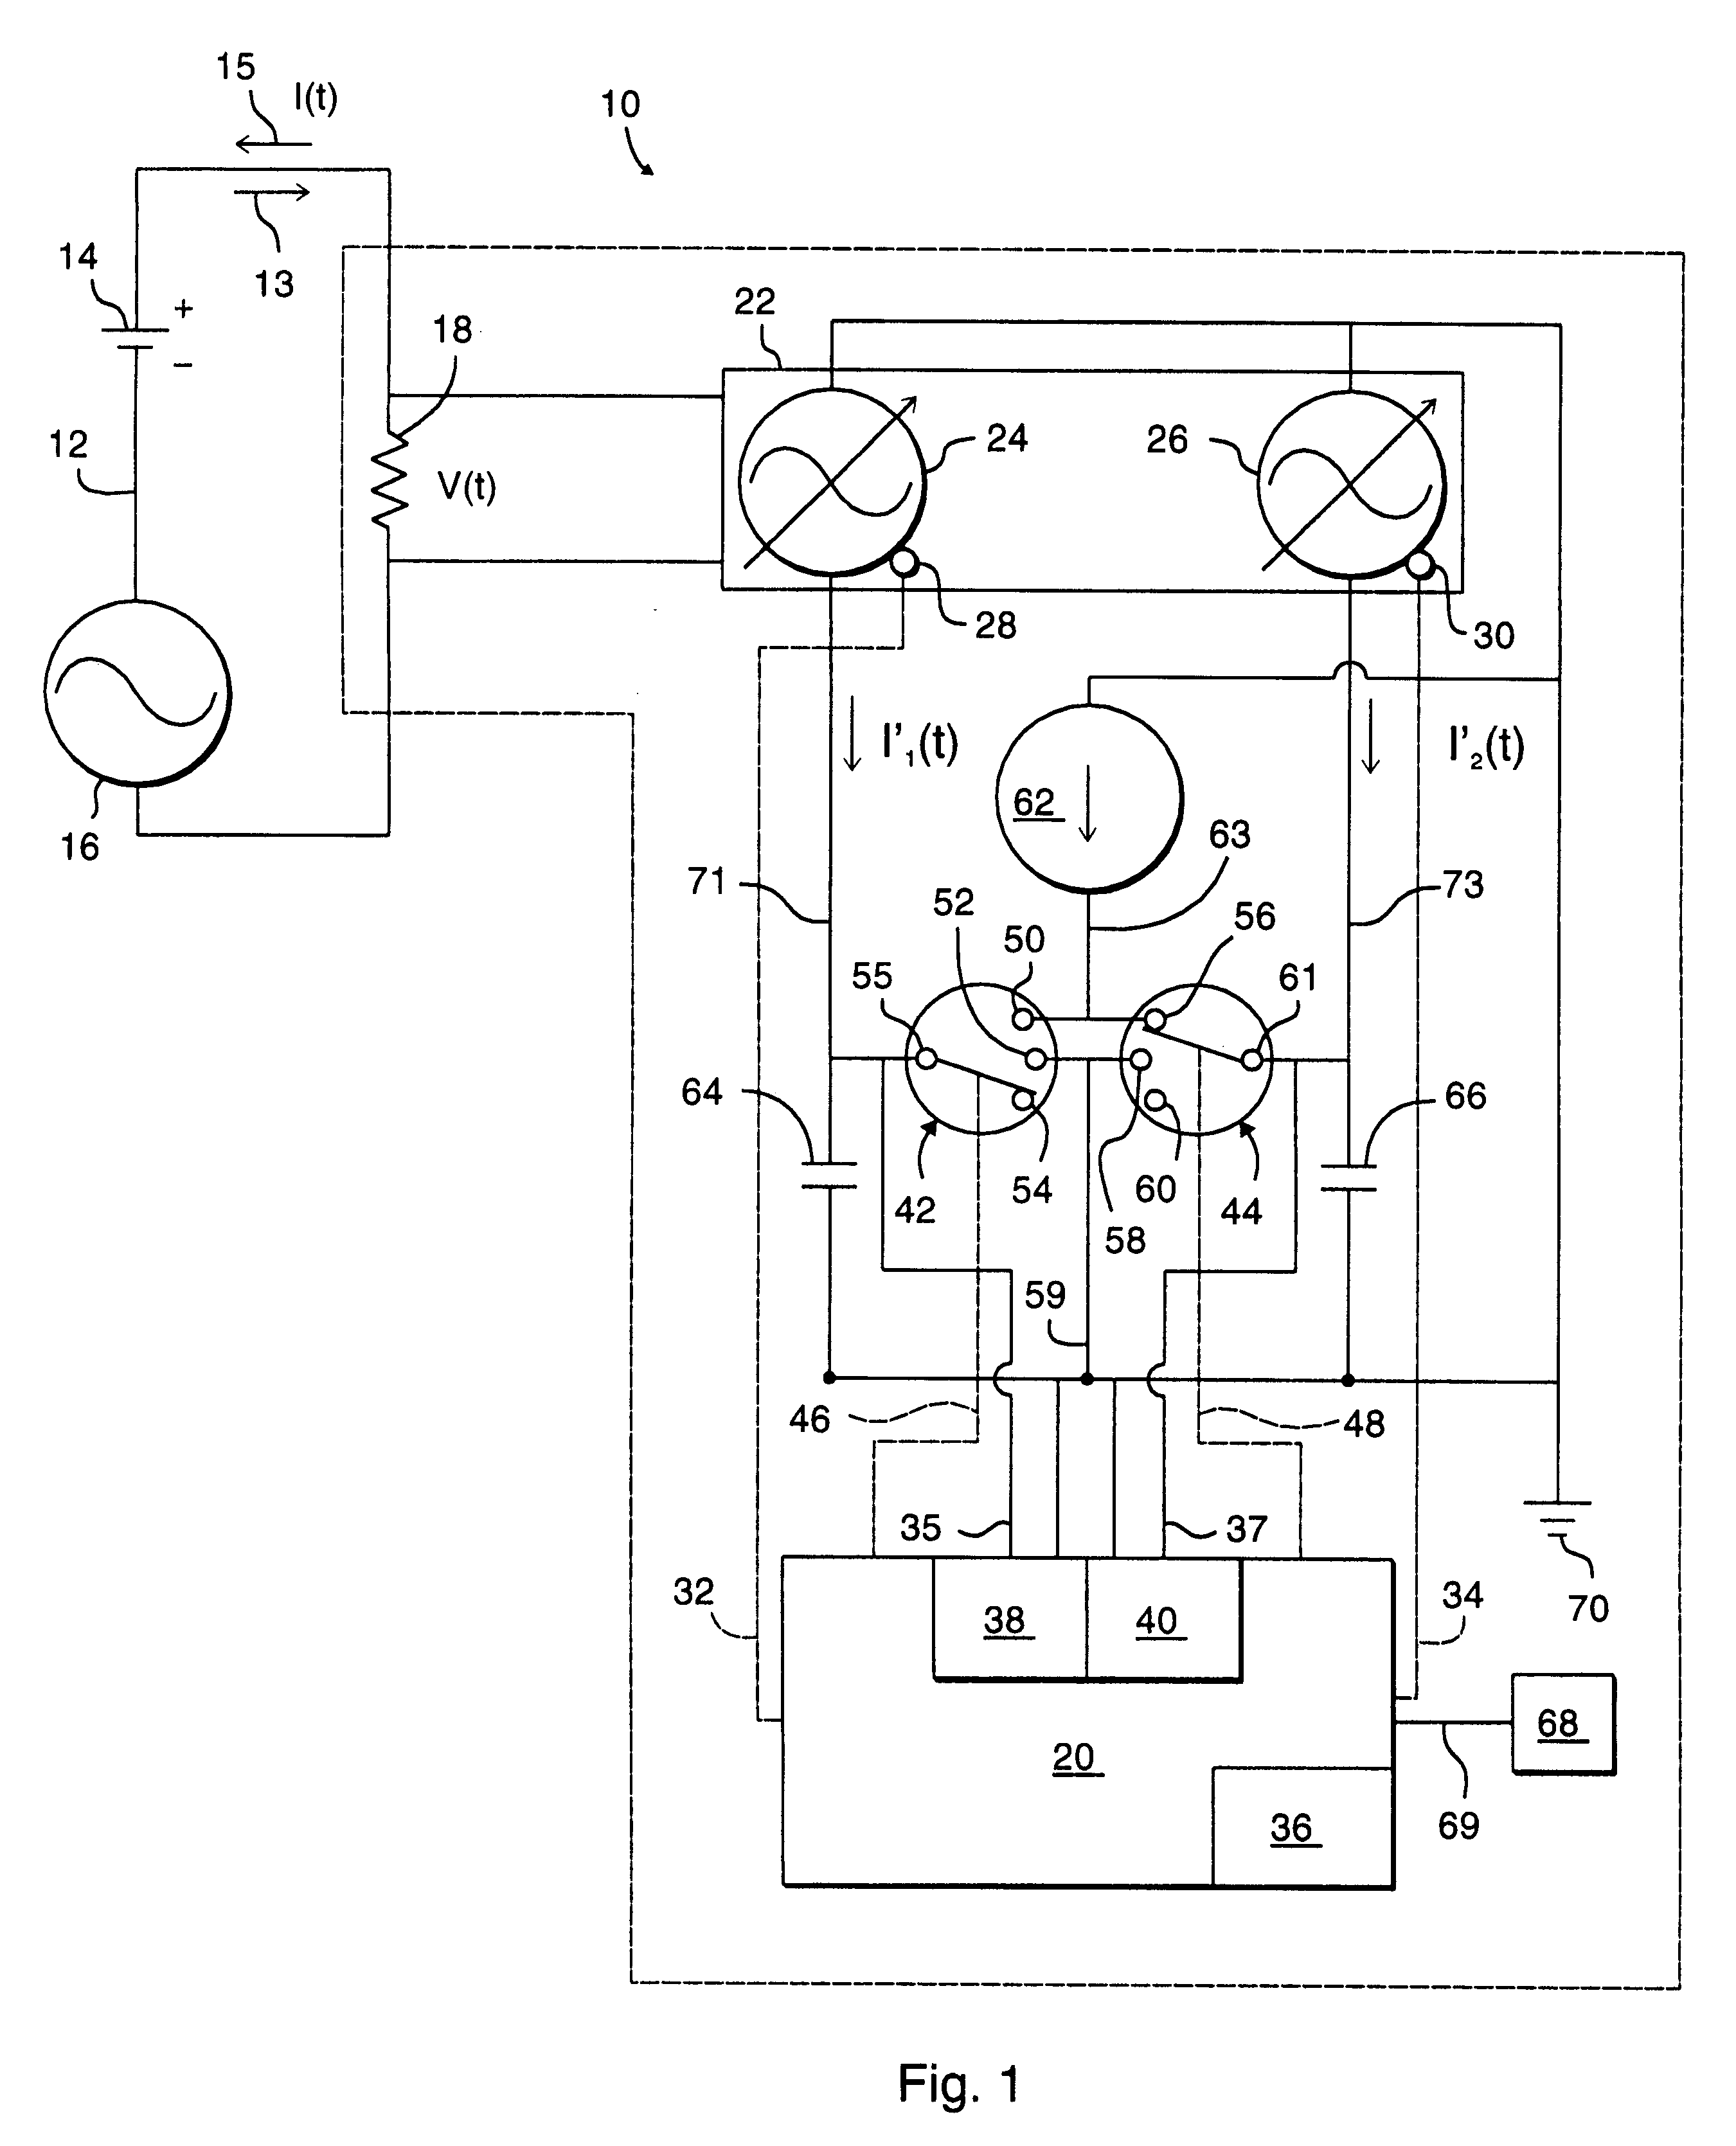 Method and apparatus for measuring the state-of-charge of a battery